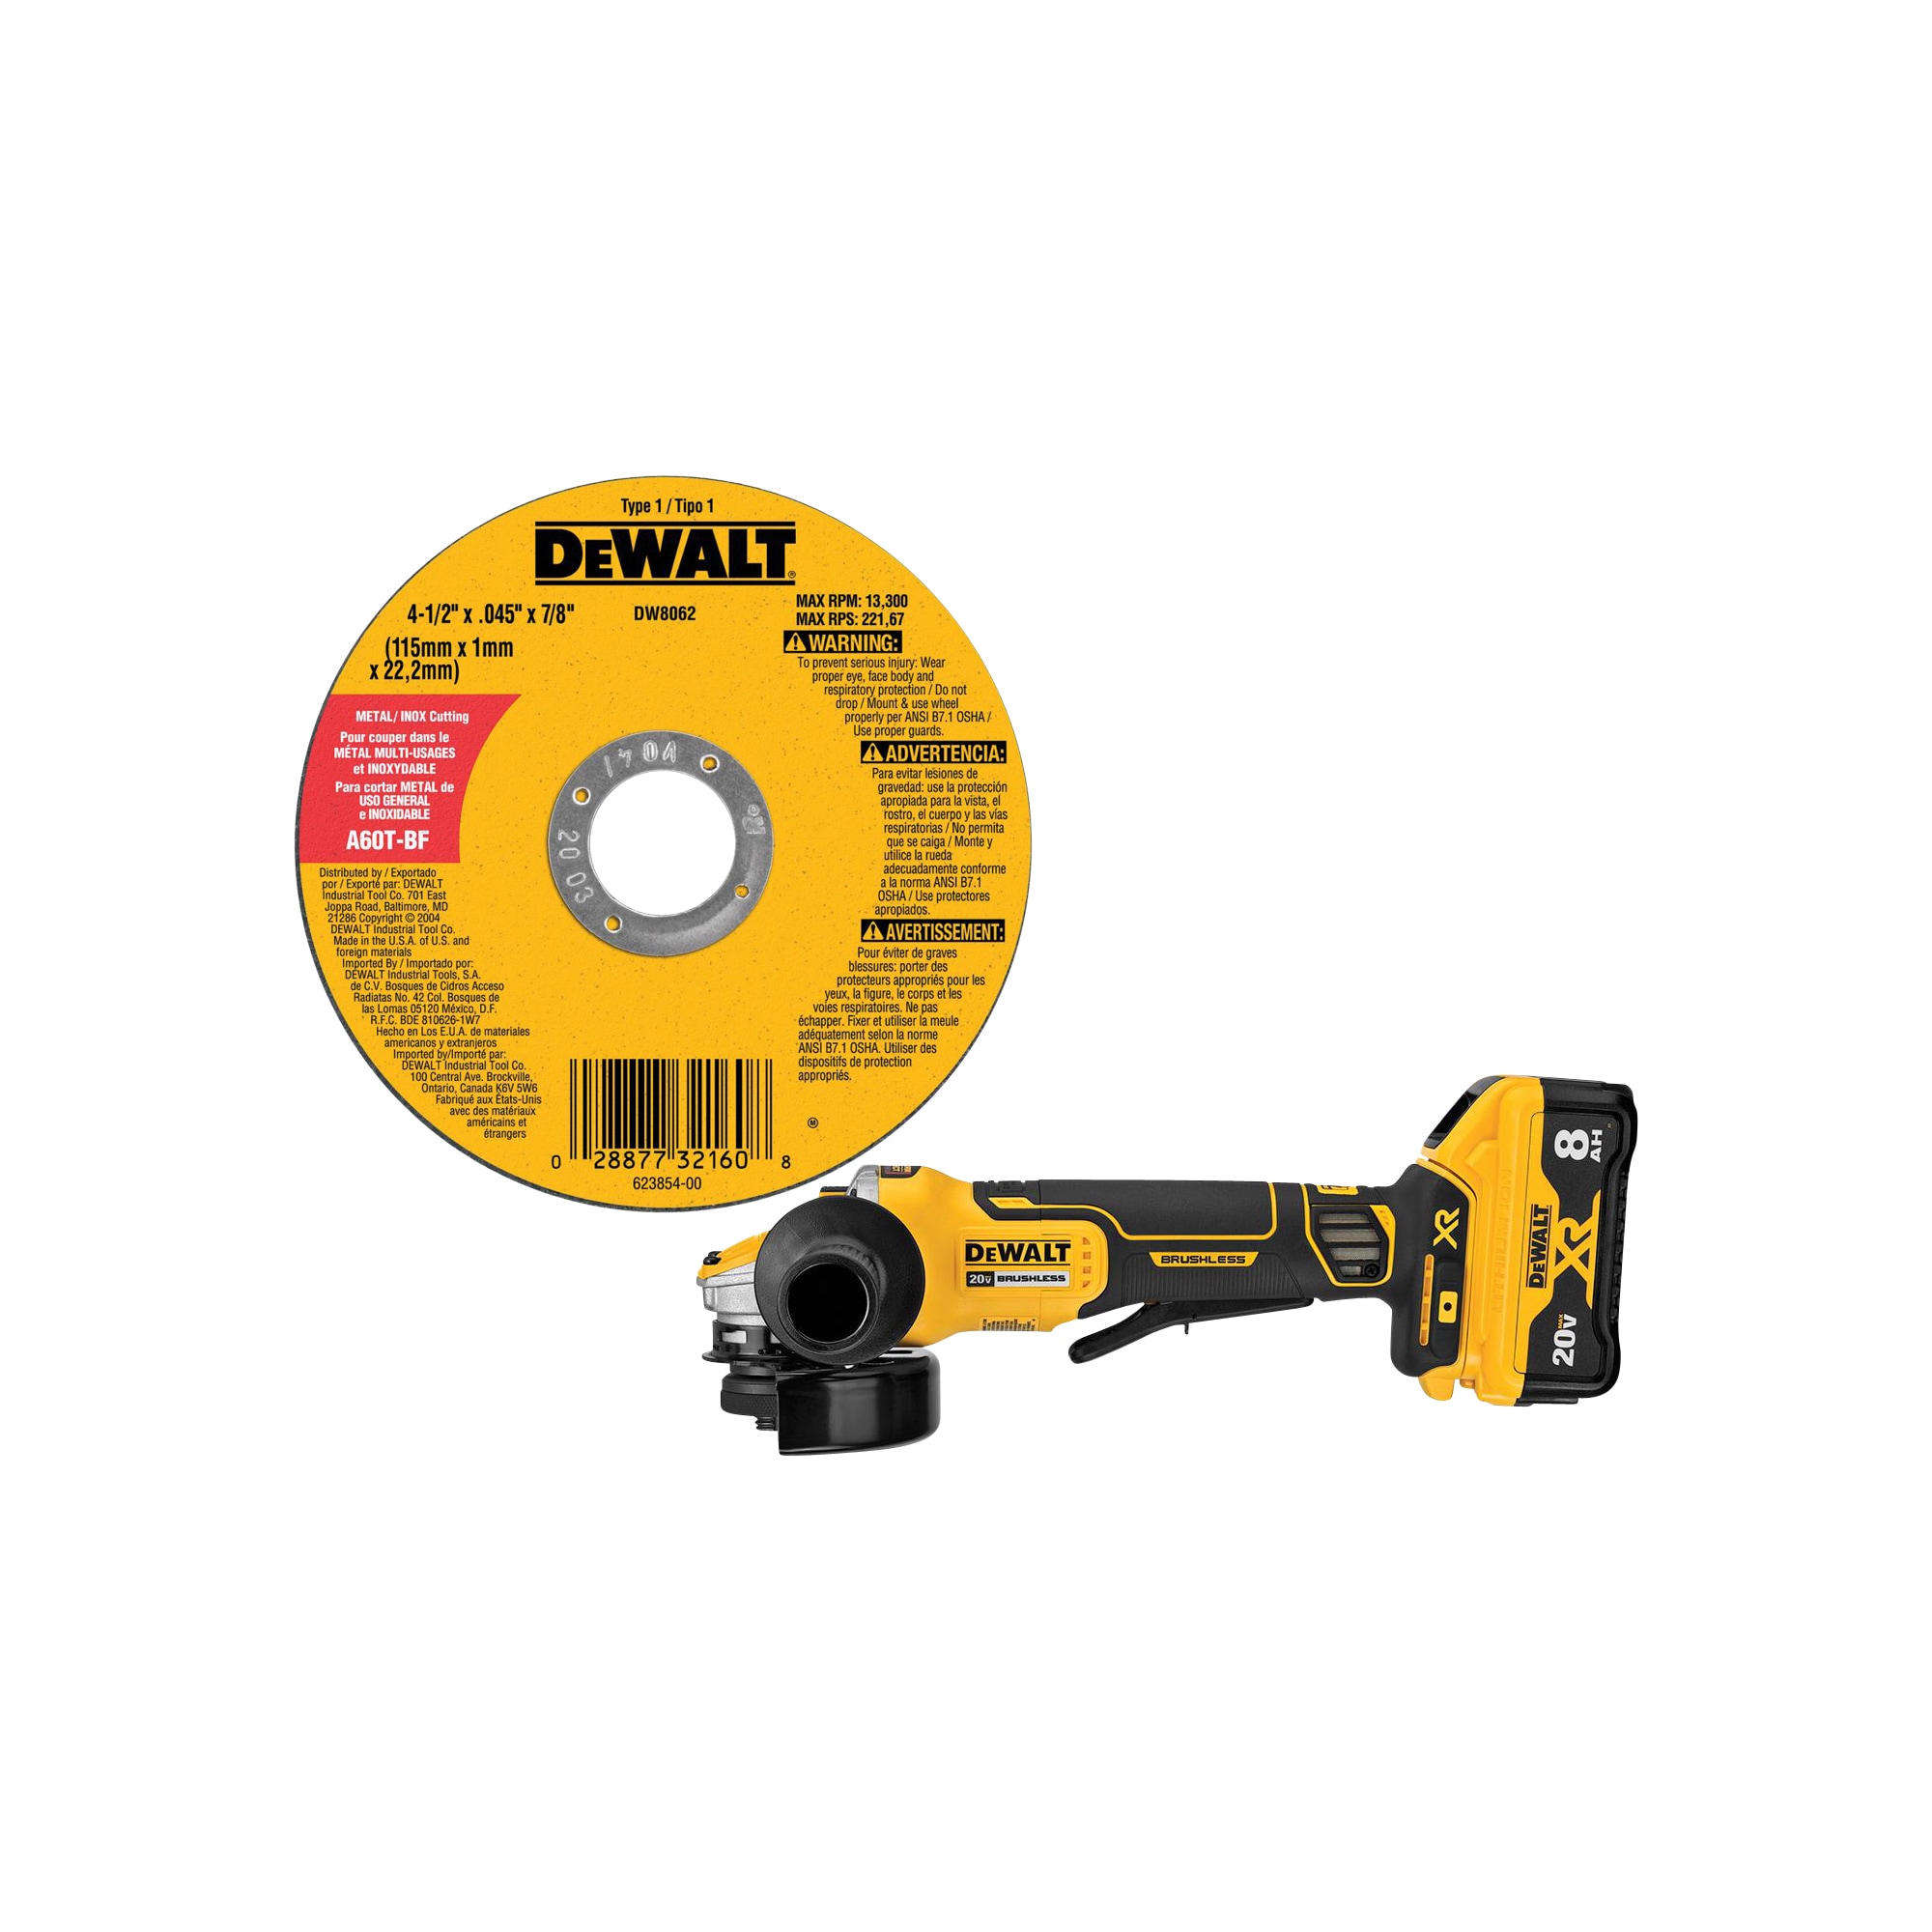 DEWALT XR POWER DETECT 5-in 20-Volt Max Paddle Switch Brushless Cordless Angle Grinder (1-Battery and charger Included) & Aluminum Oxide 4.5-in